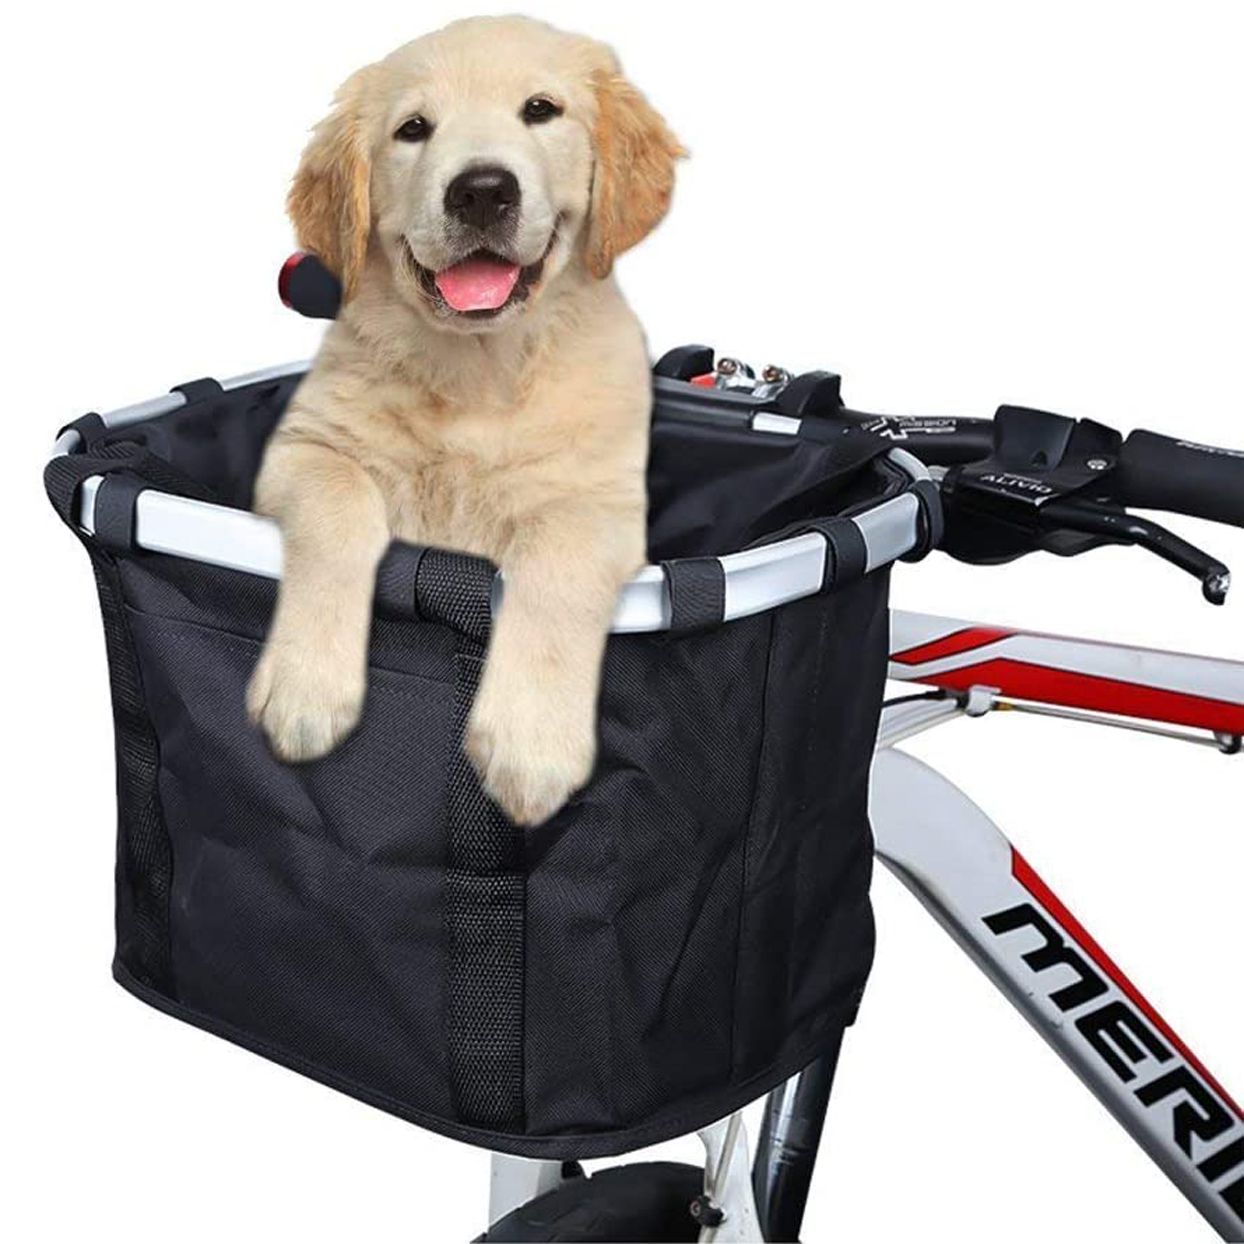 Pet Dog Bicycle Carrier Travel Shopping Bags for all Bikes ELR Pet Bicycle Carrier Bike Basket Bag for Dogs/Cats with Adjustable Padded Shoulder Strap